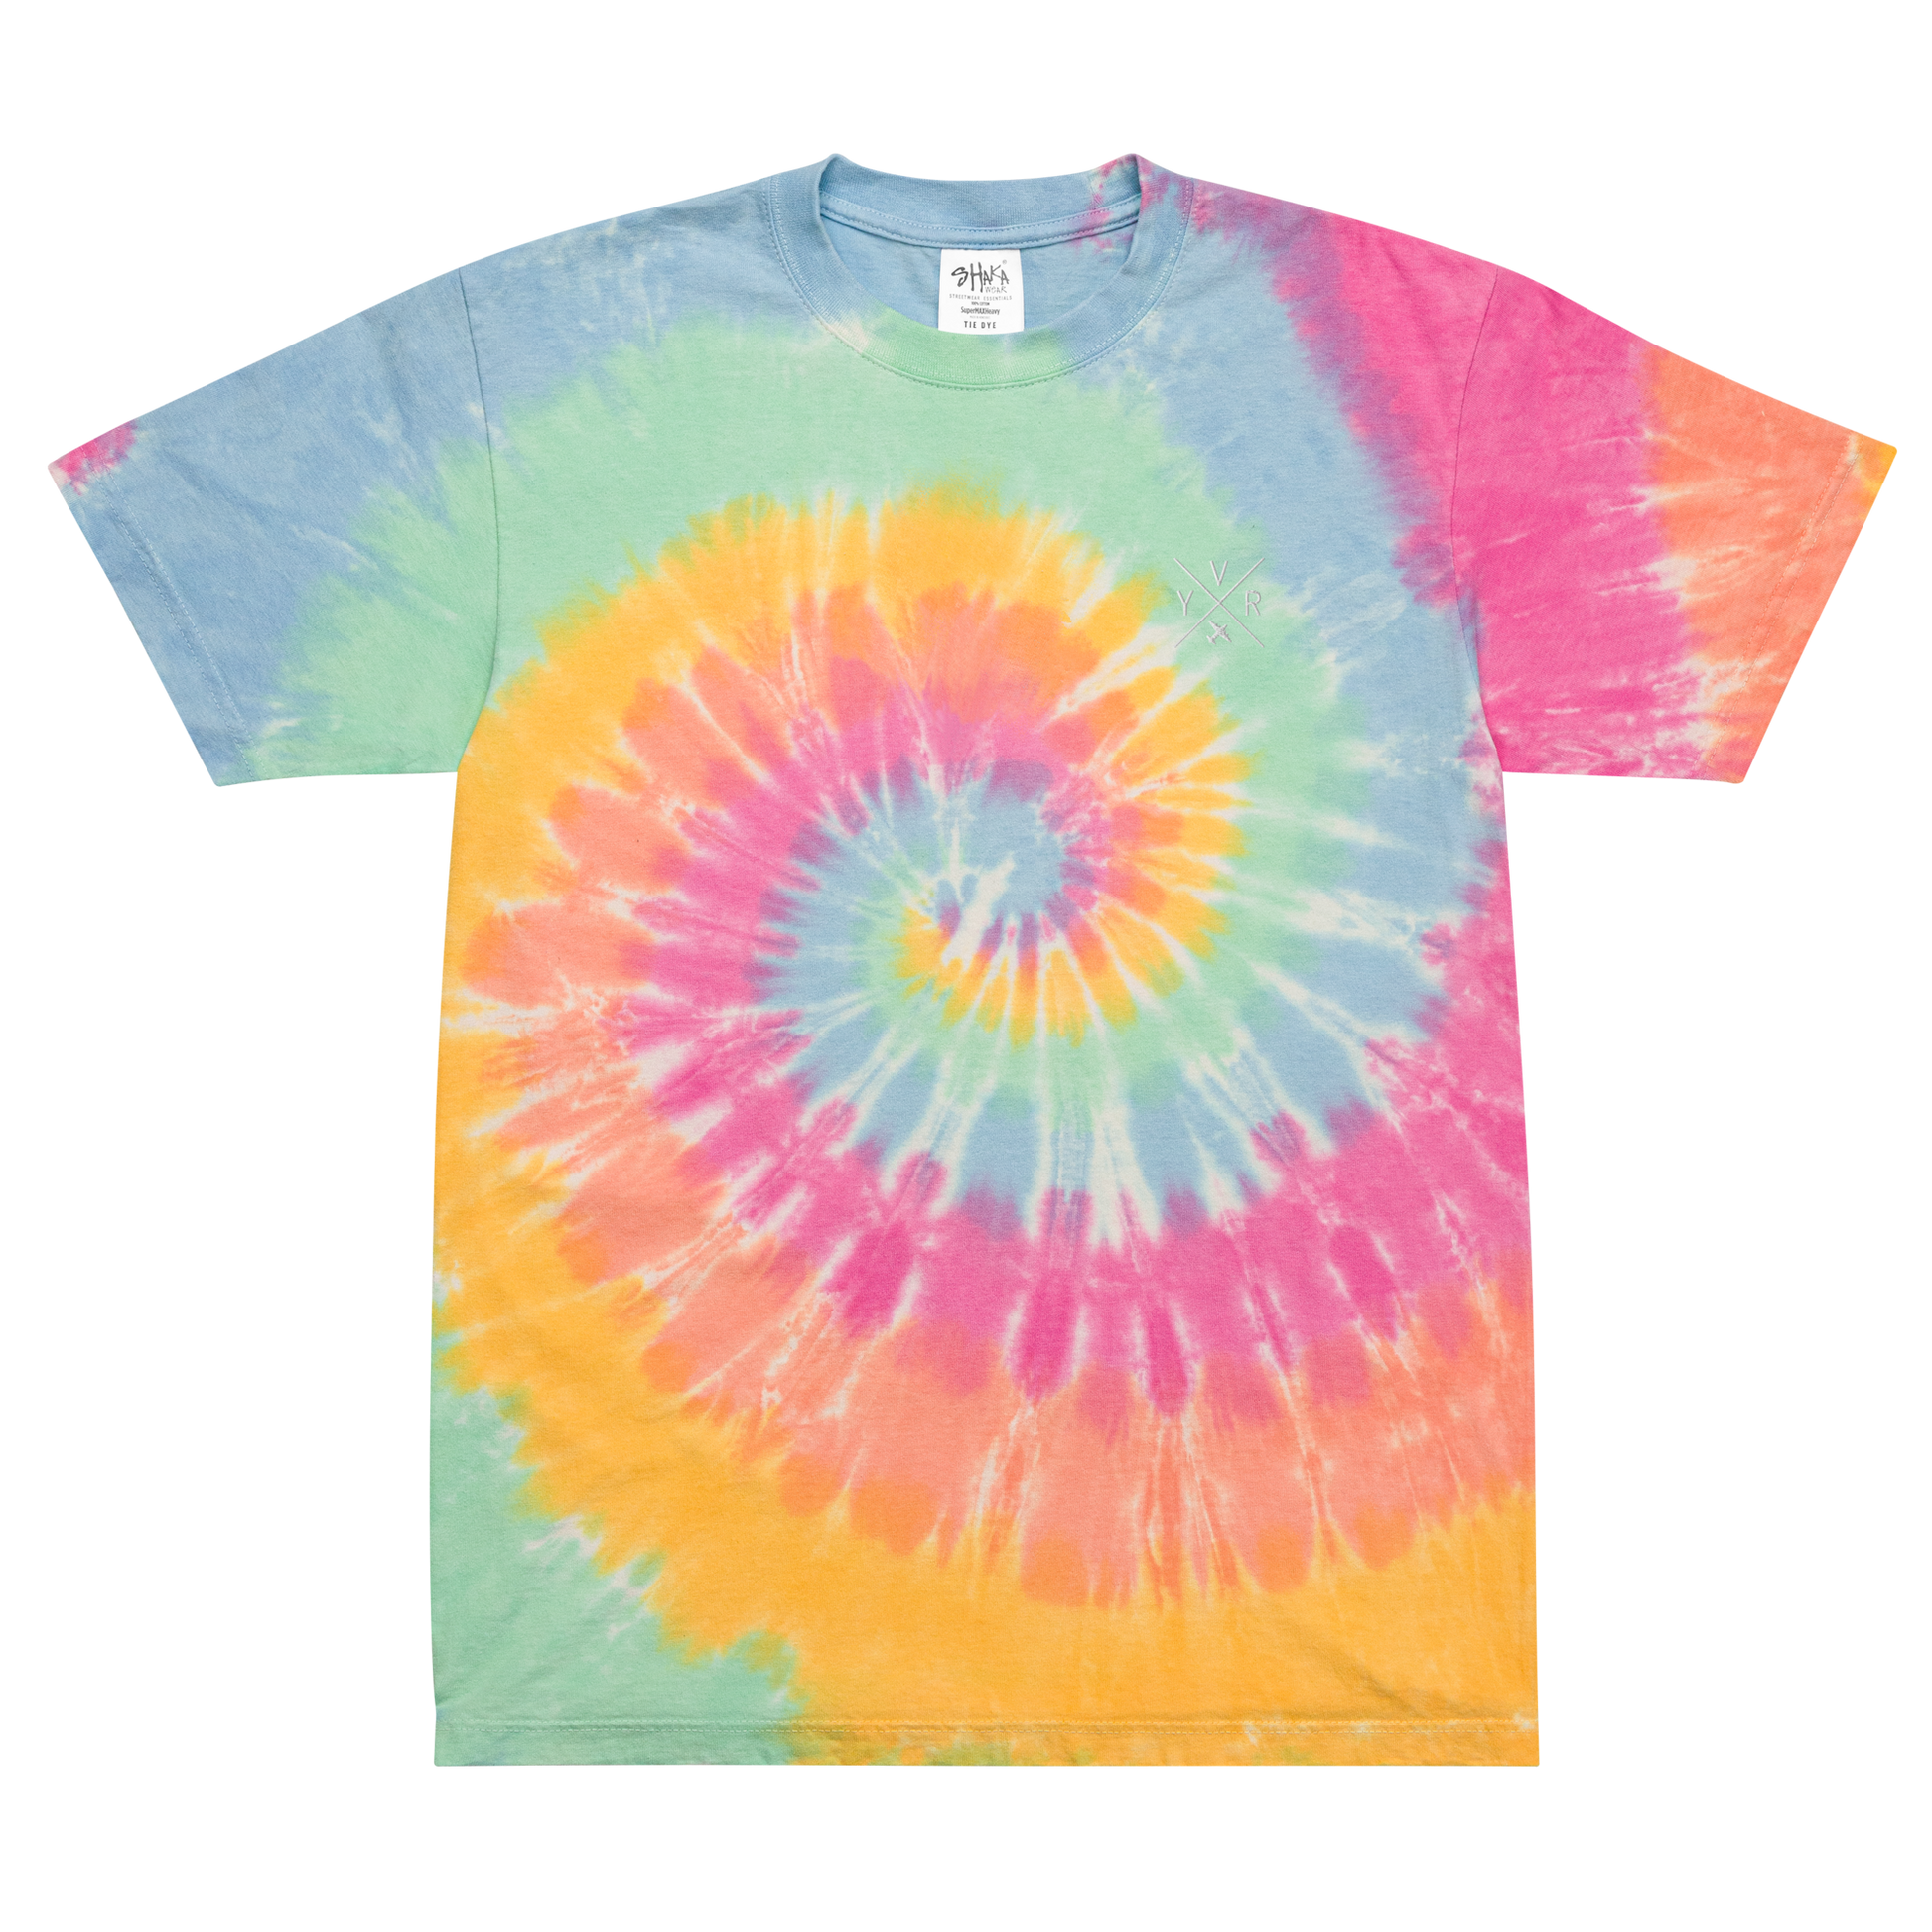 Crossed-X Oversized Tie-Dye T-Shirt • YVR Vancouver • YHM Designs - Image 02